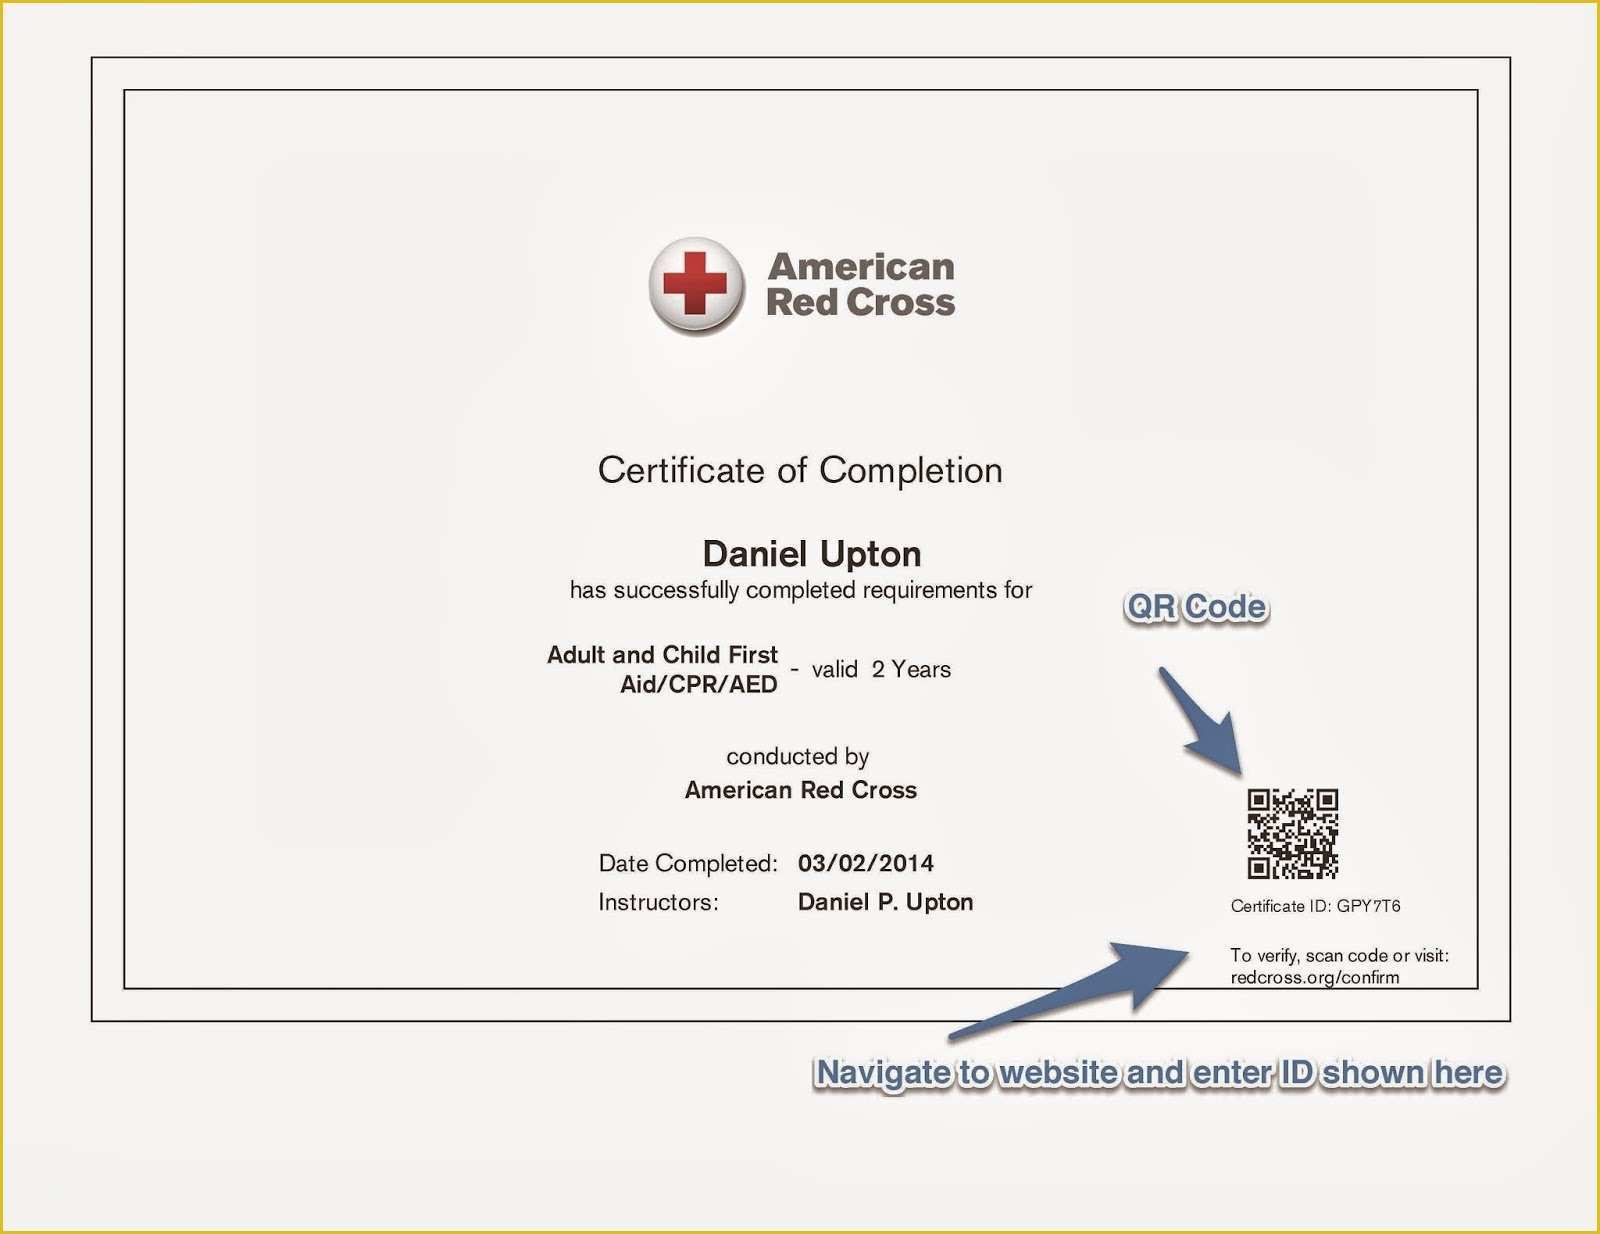 Free Cpr Card Template Of Cpr Card Templates 5 Cpr Card Templates Appraisal Letter